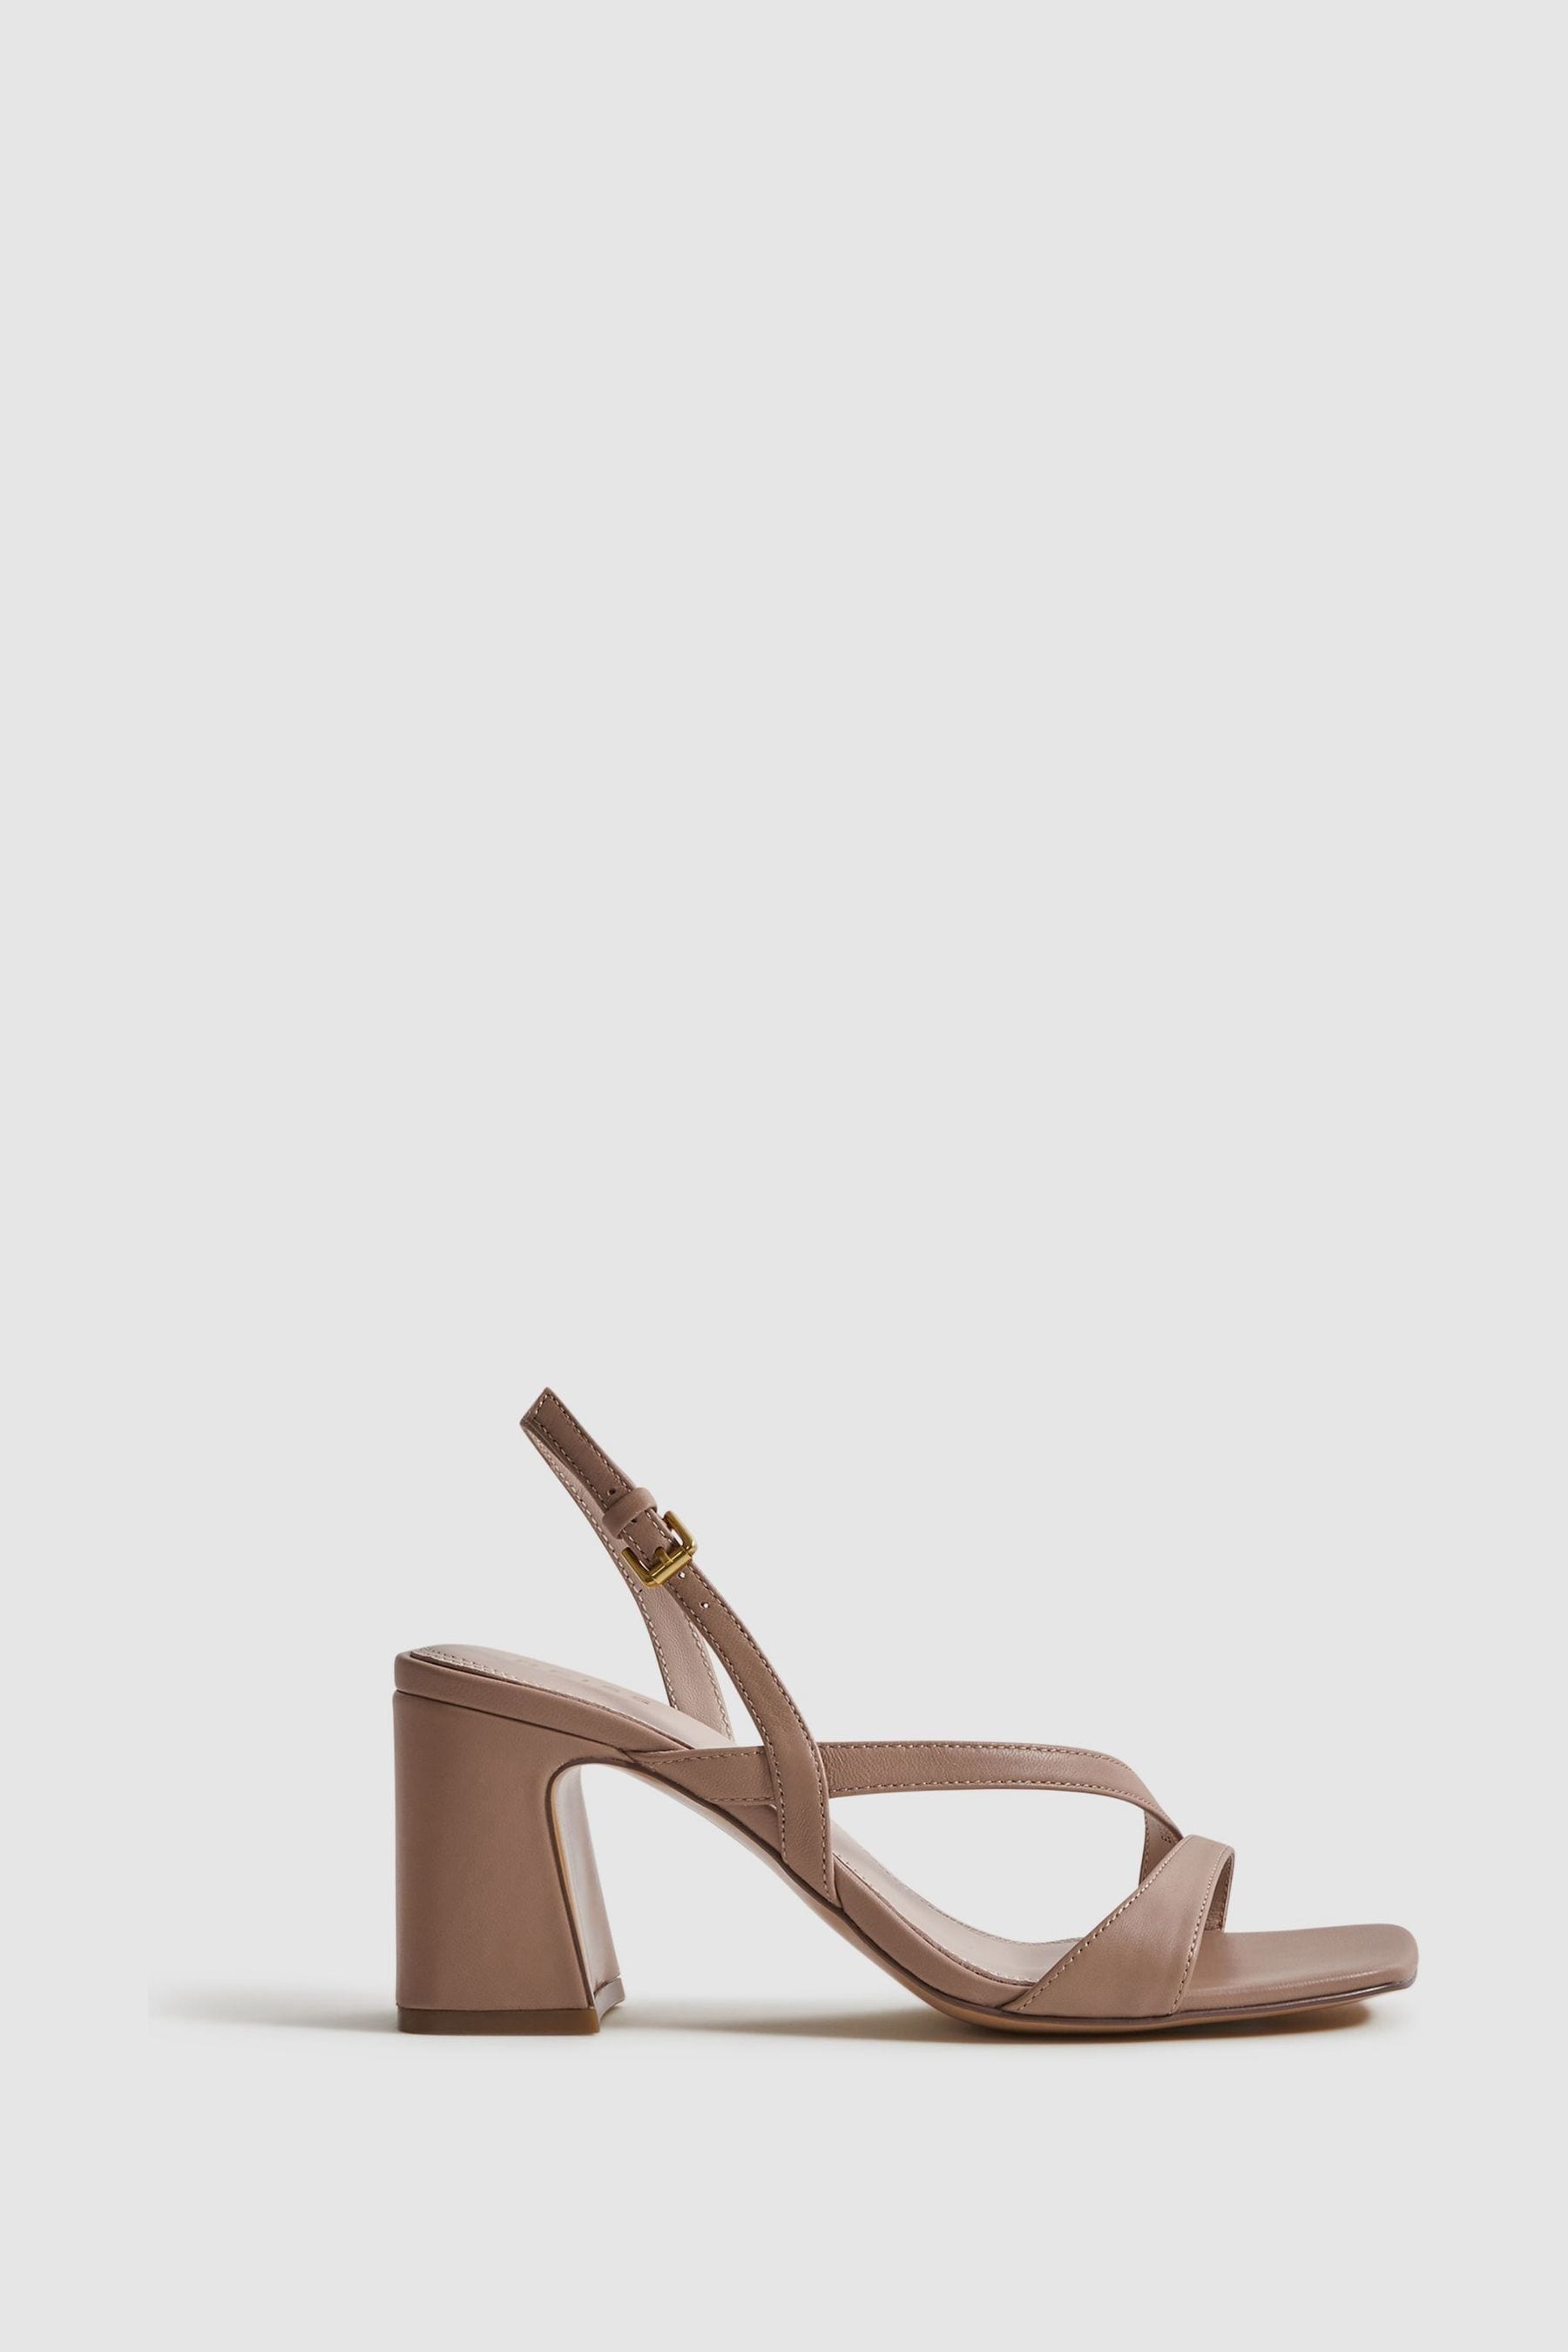 Reiss Alice - Nude Strappy Leather Heeled Sandals, Uk 4 Eu 37